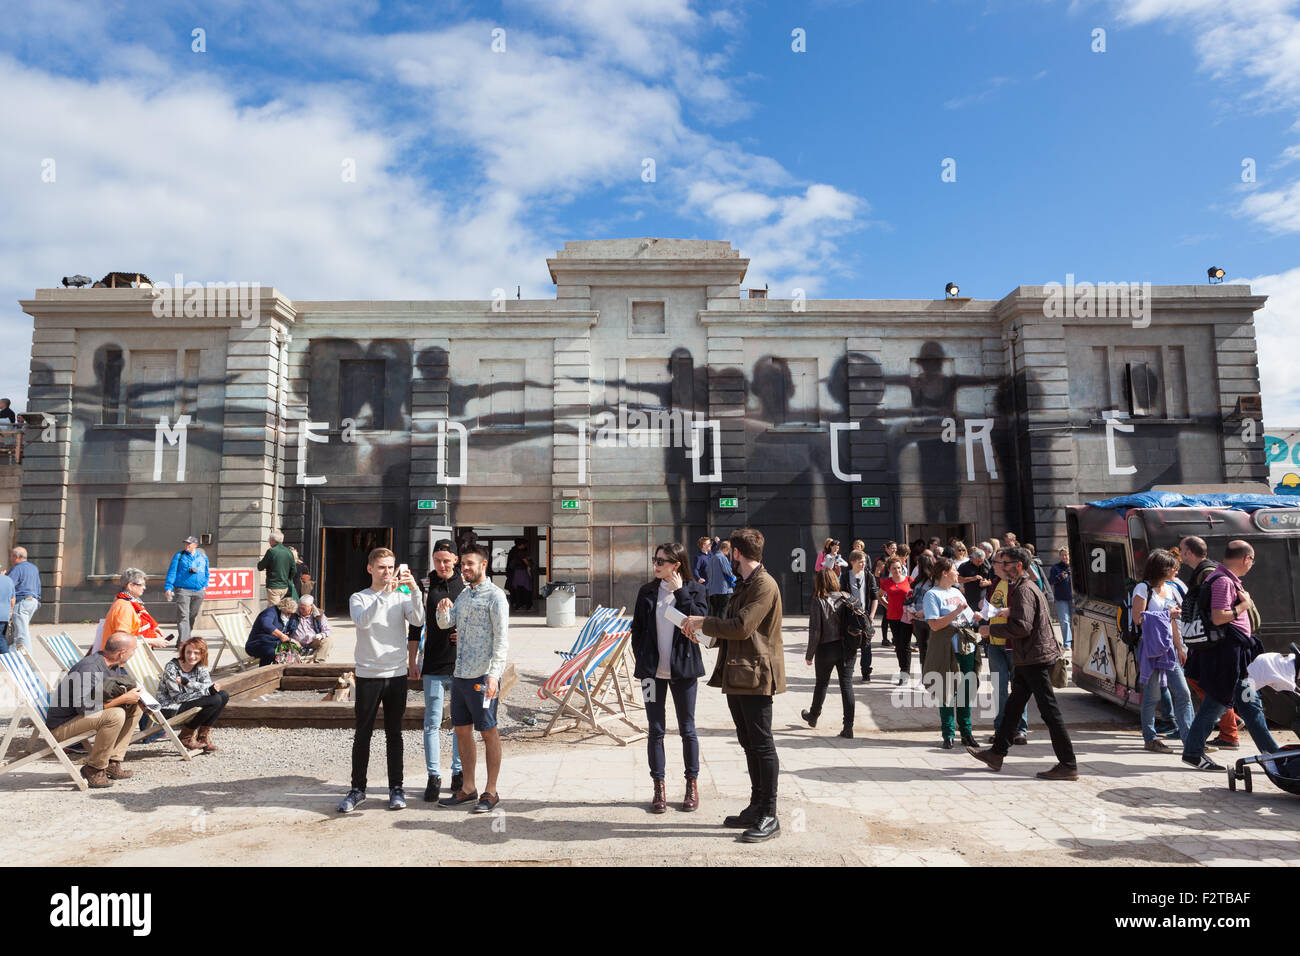 Visitors inside Banksy's Dismaland stand in front of a building with the word Mediocre painted on it by Axel Void. Stock Photo